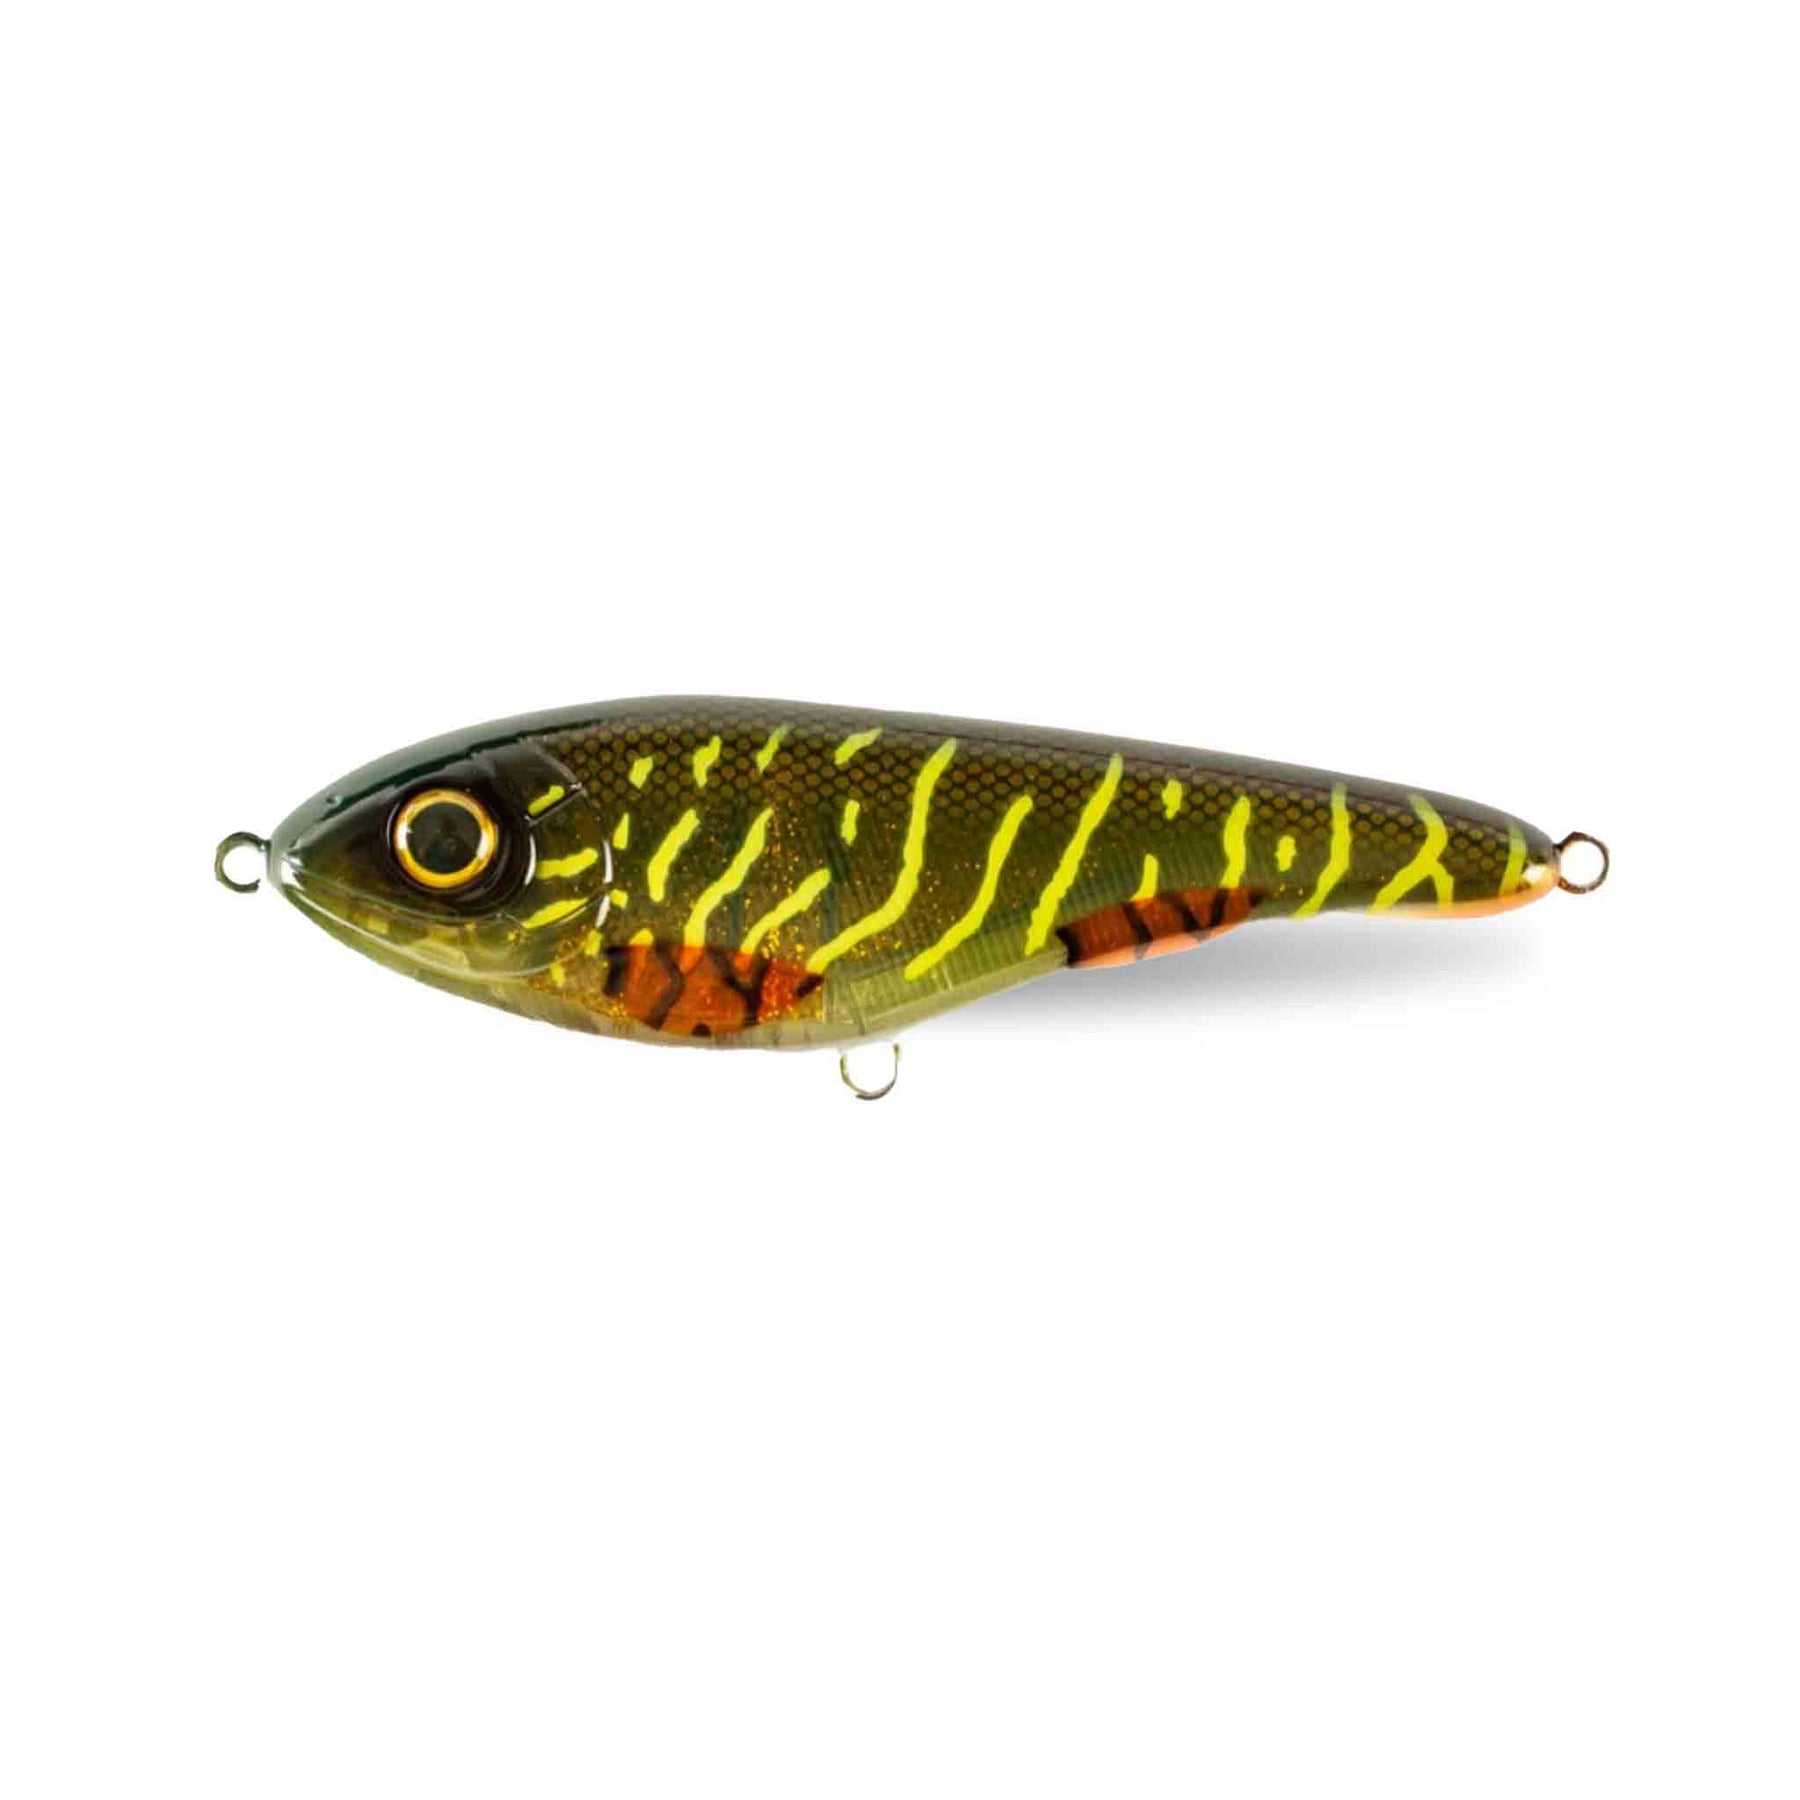 View of Jerk-Glide_Baits Strike Pro Buster Jerk II Suspending Glide Bait Green Motoroil Pike available at EZOKO Pike and Musky Shop